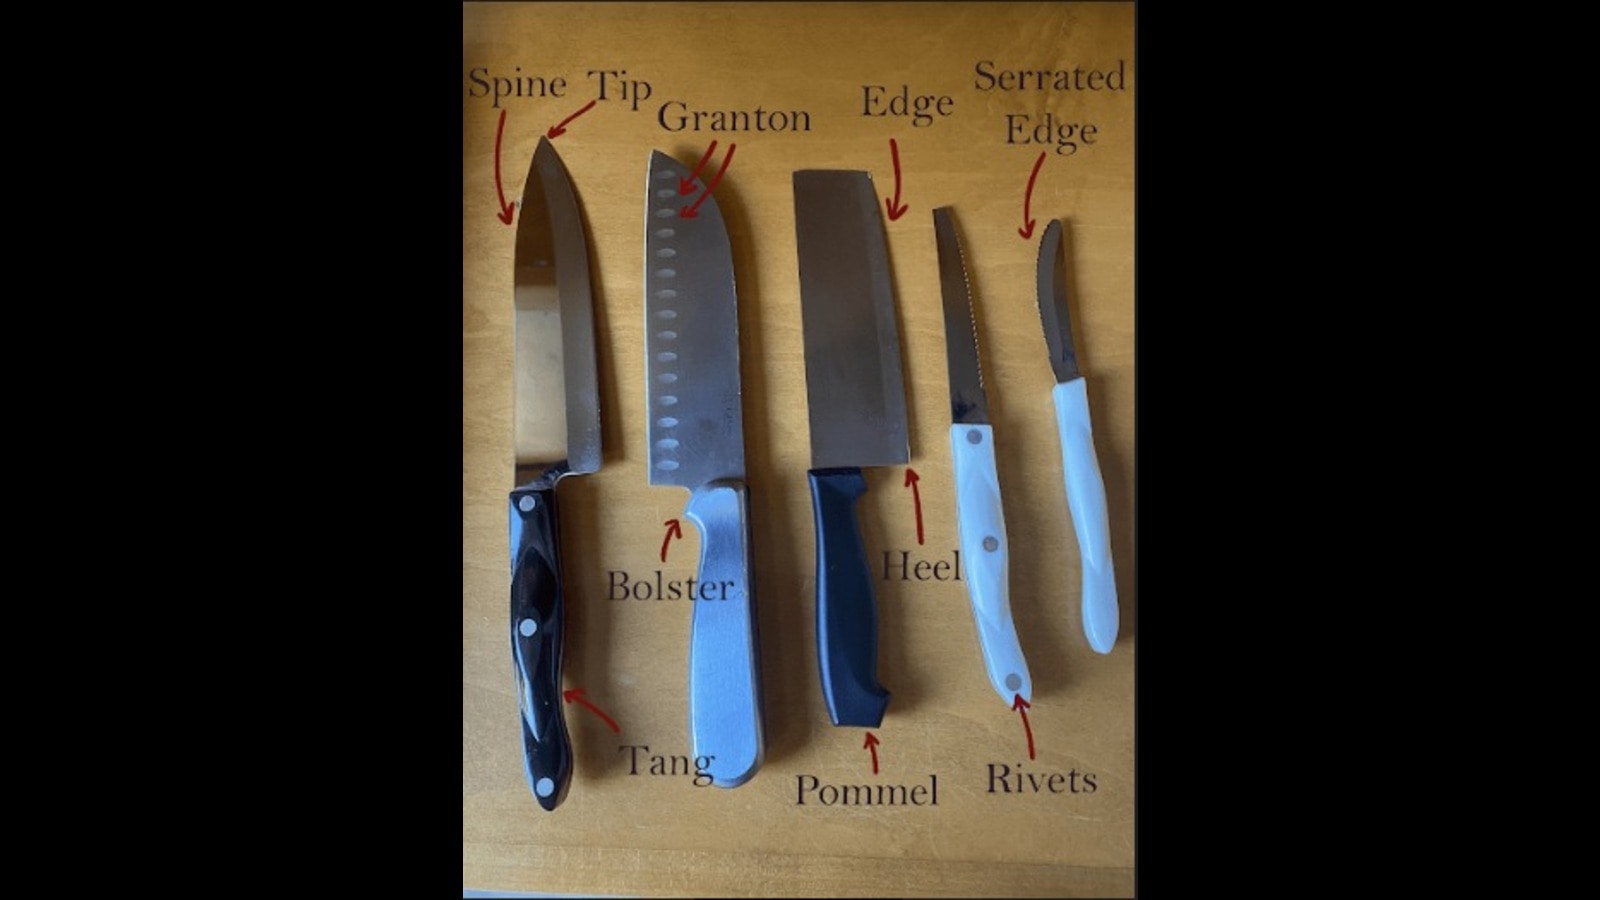 The typical representation of the hay knife, where the handle is